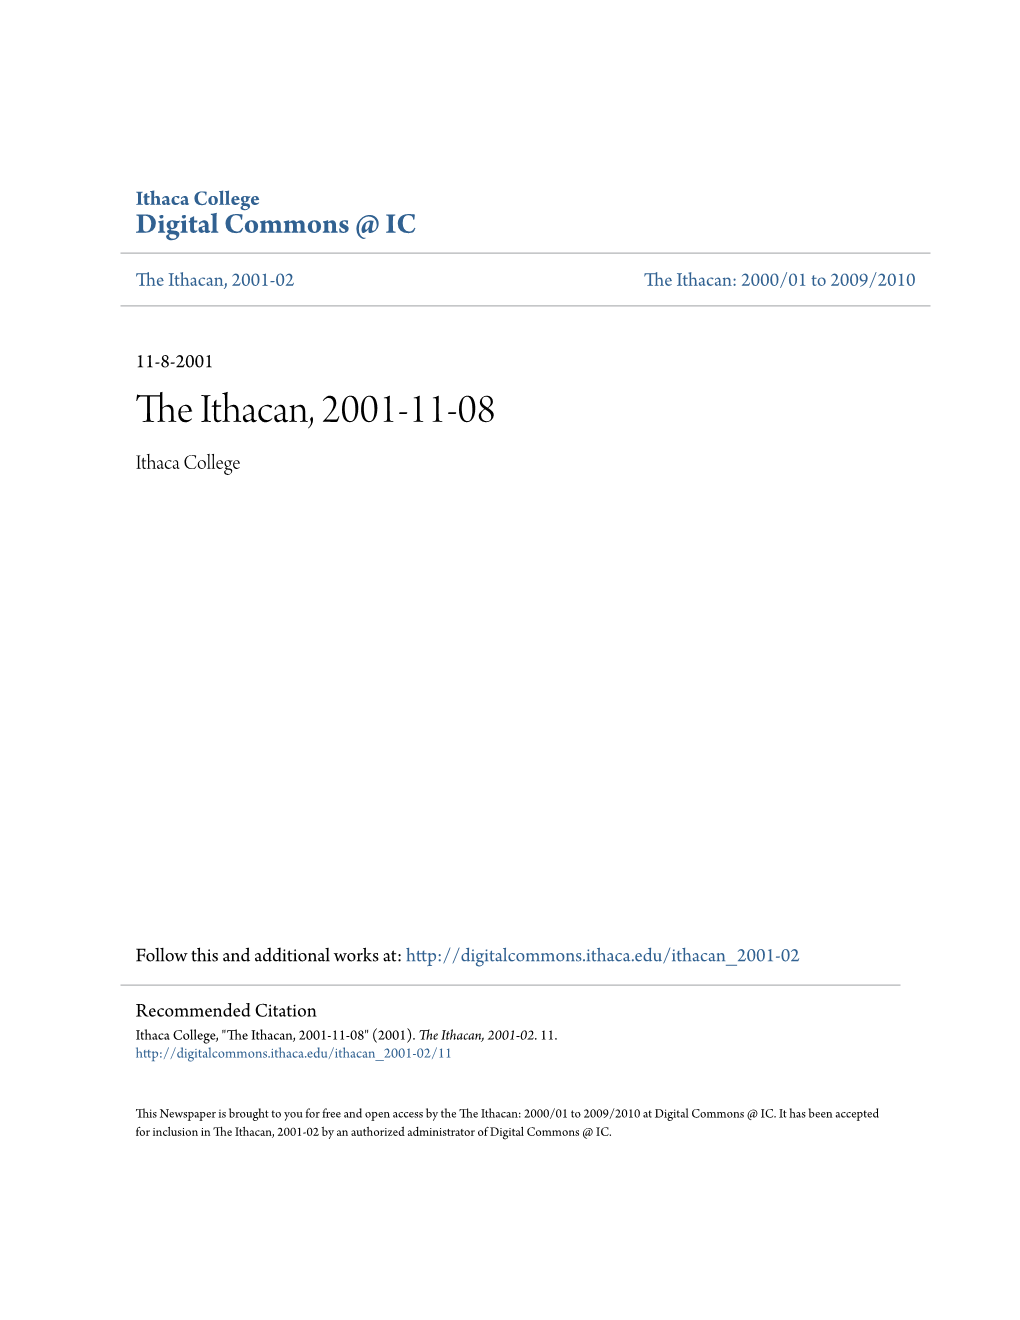 The Ithacan, 2001-11-08